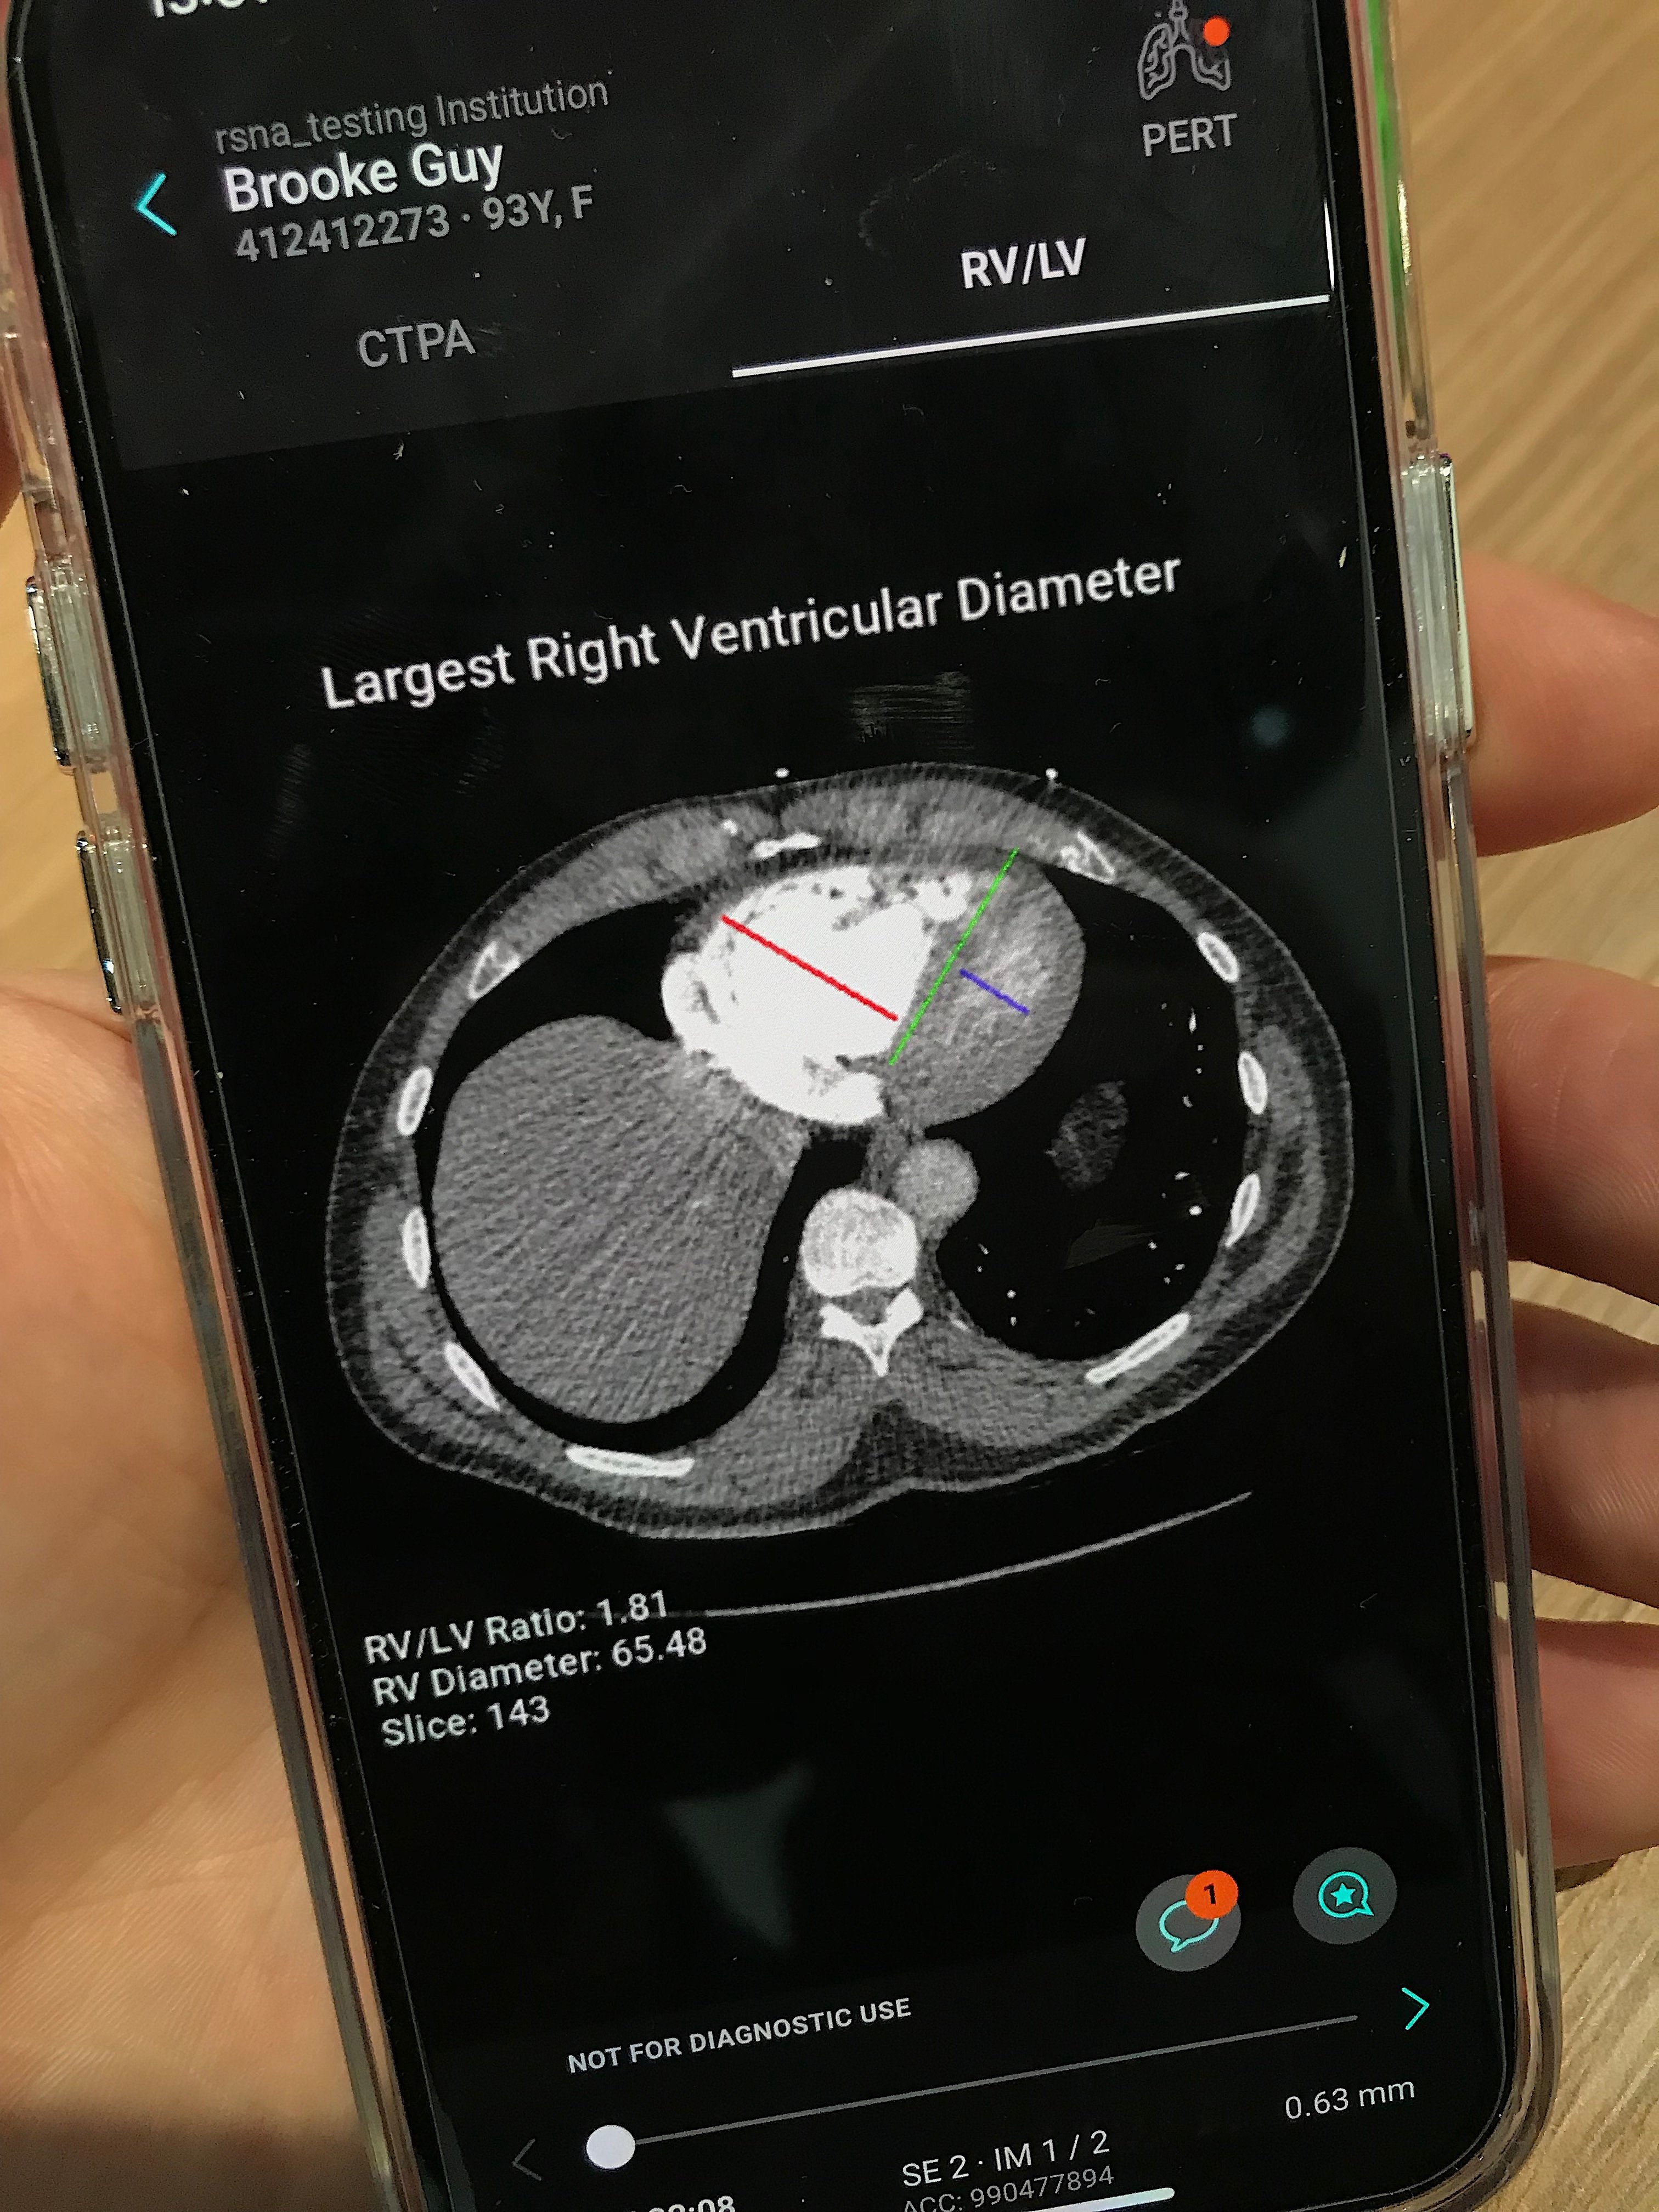 Aidoc's PERT team activation app inludes Imbio's AI RV/LV ratio assessment to help risk stratify the patient.